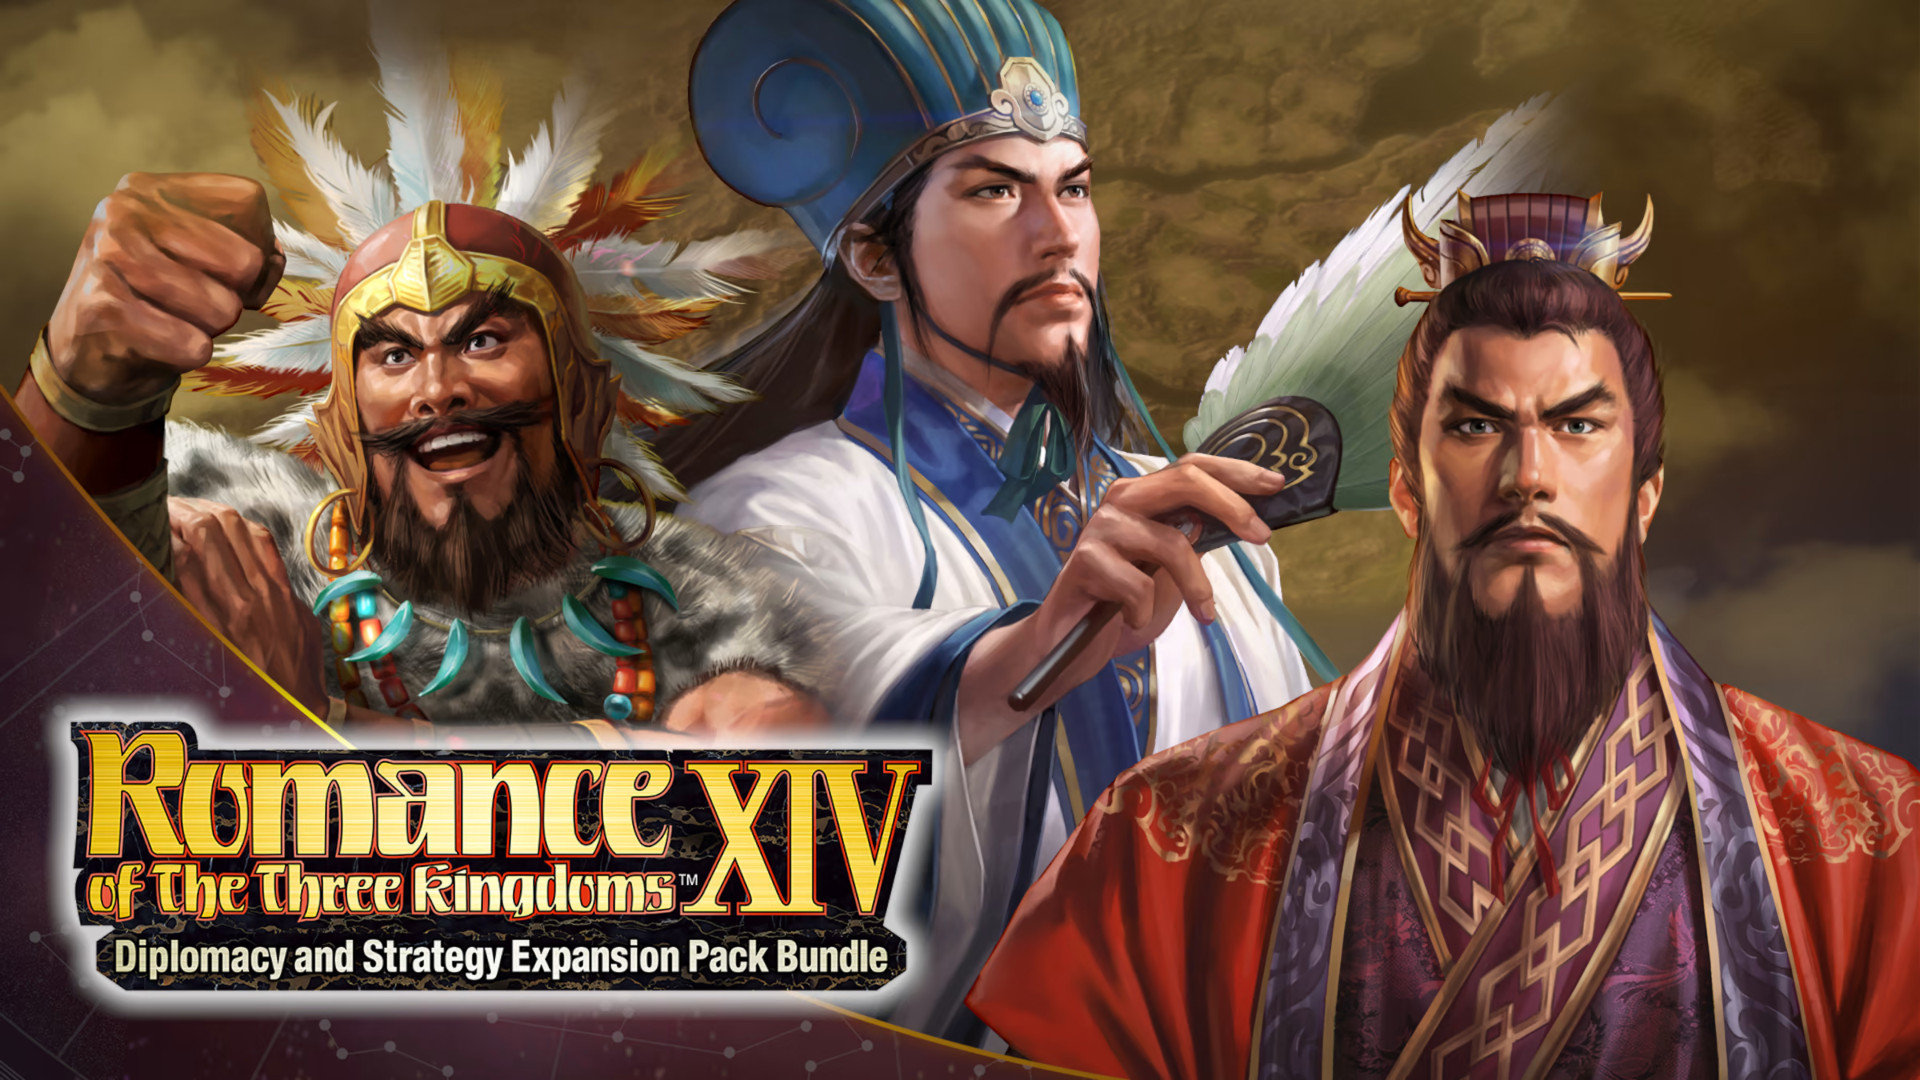 Romance of the Three Kingdoms XIV - Diplomacy and Strategy Expansion Pack DLC Steam CD key 39.55 $